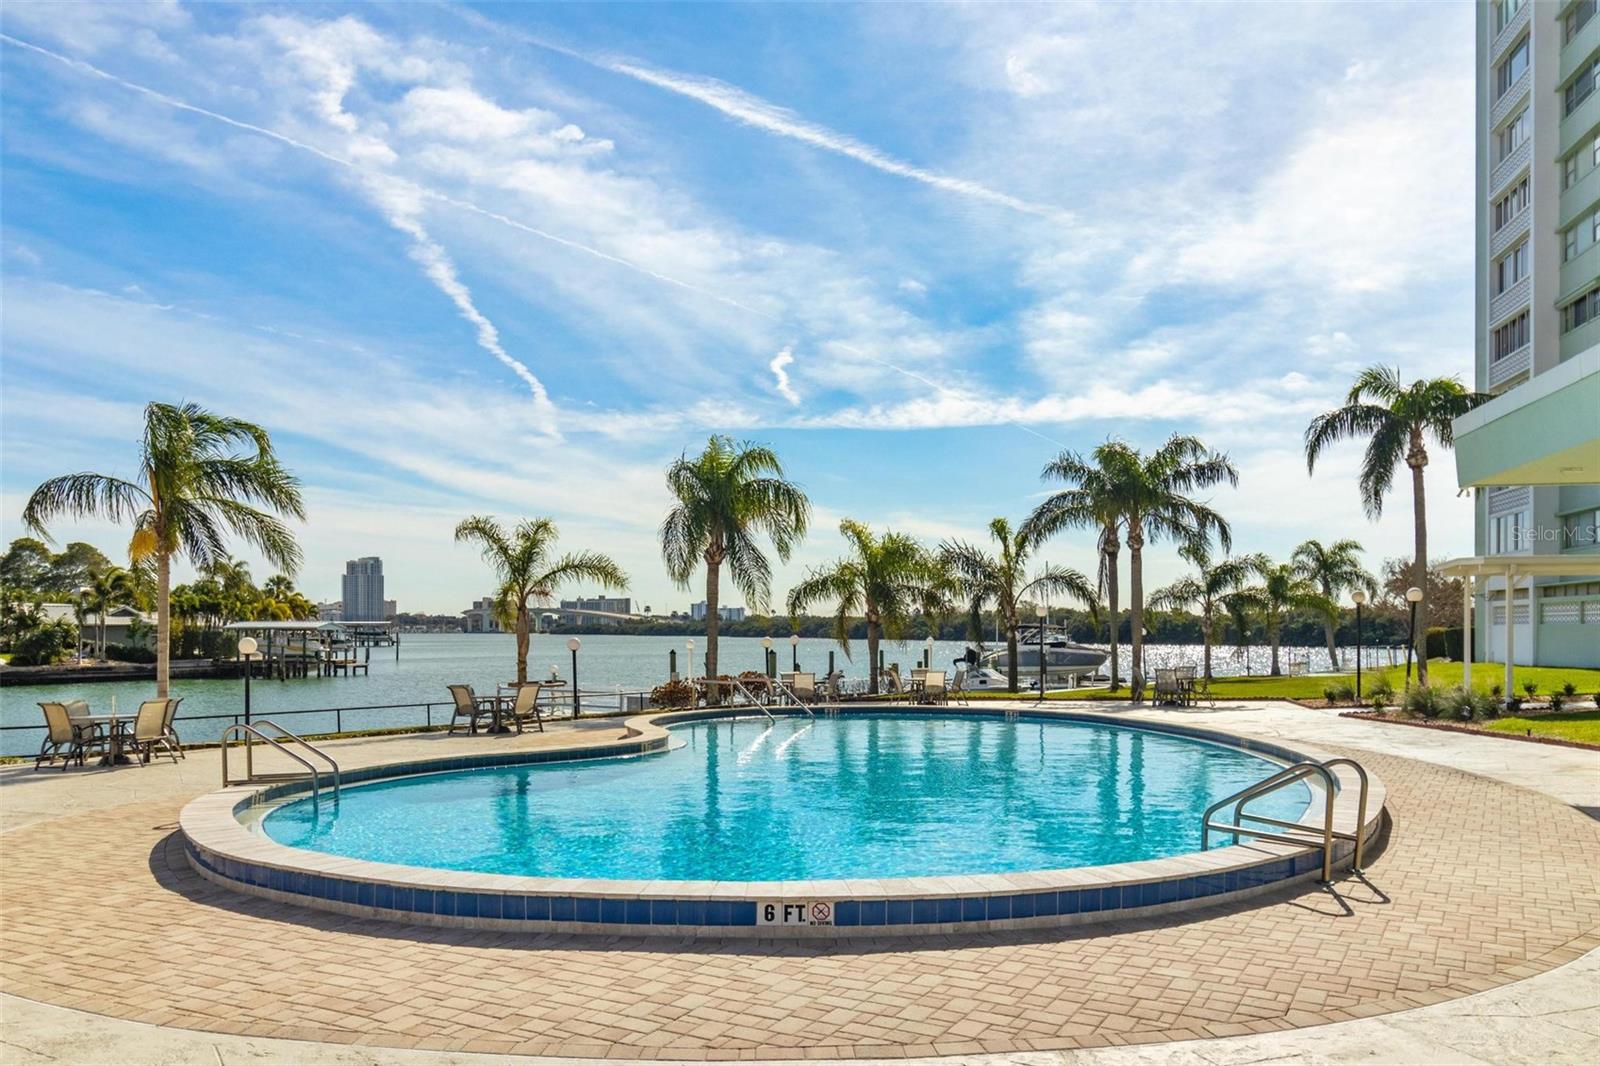 Enjoy the pool while dolphins swim by in the intercoastal!